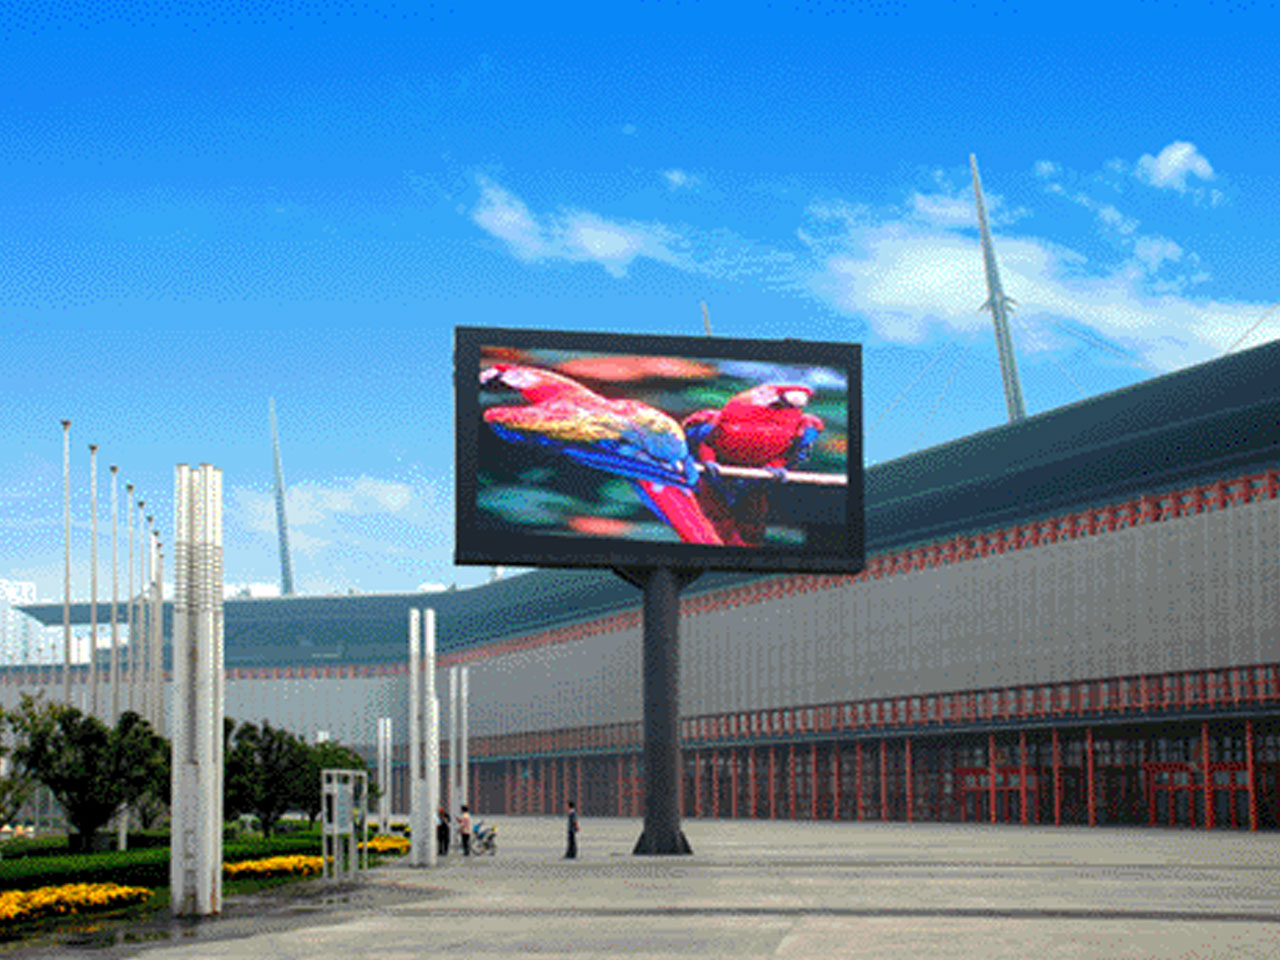 What issues should we consider before installation and operation of outdoor display